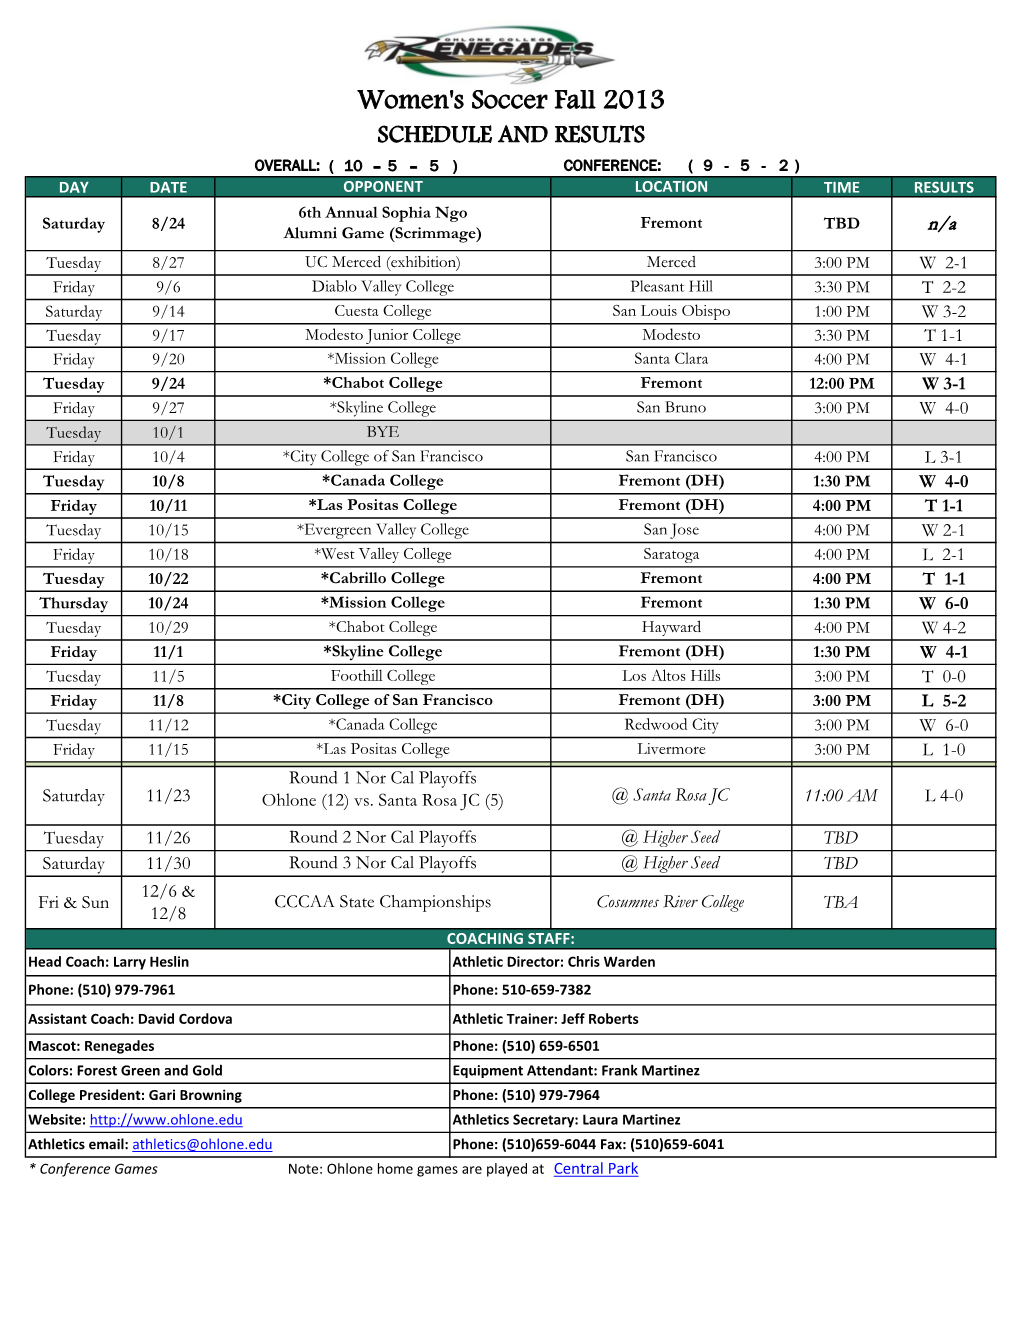 Women's Soccer 2013 Schedule and Results